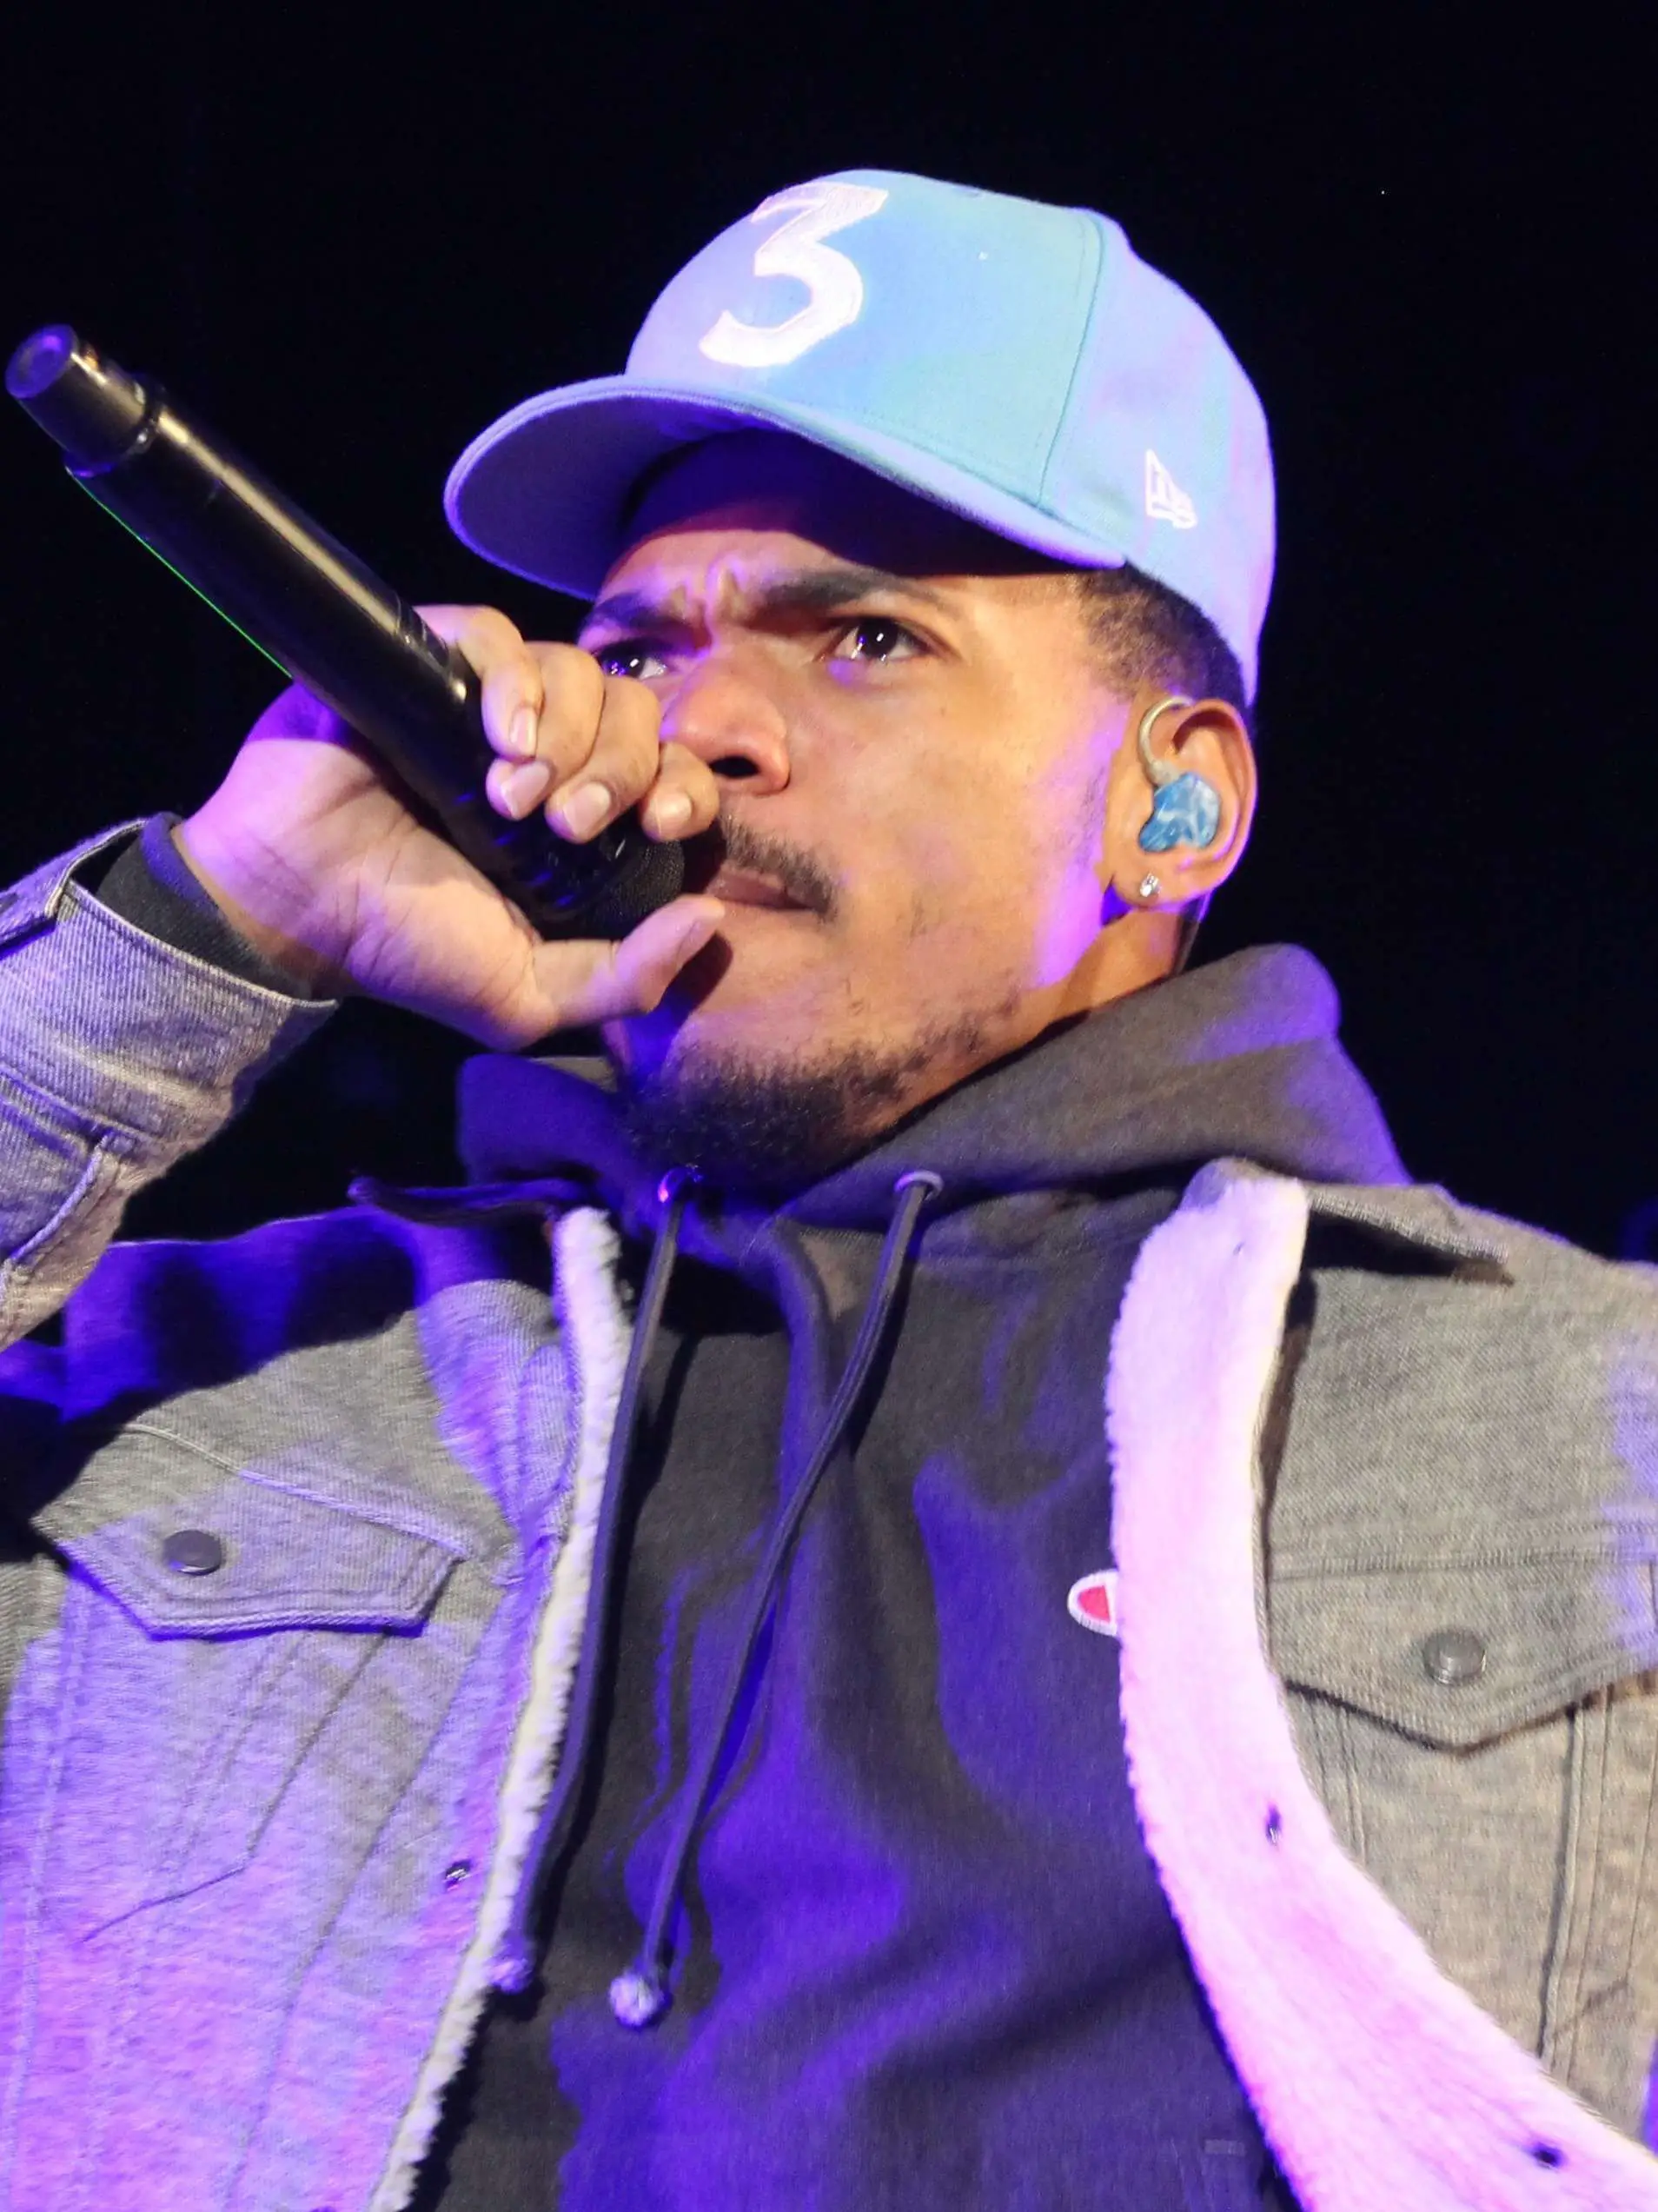 Chance the Rapper in 3 blue hat on stage